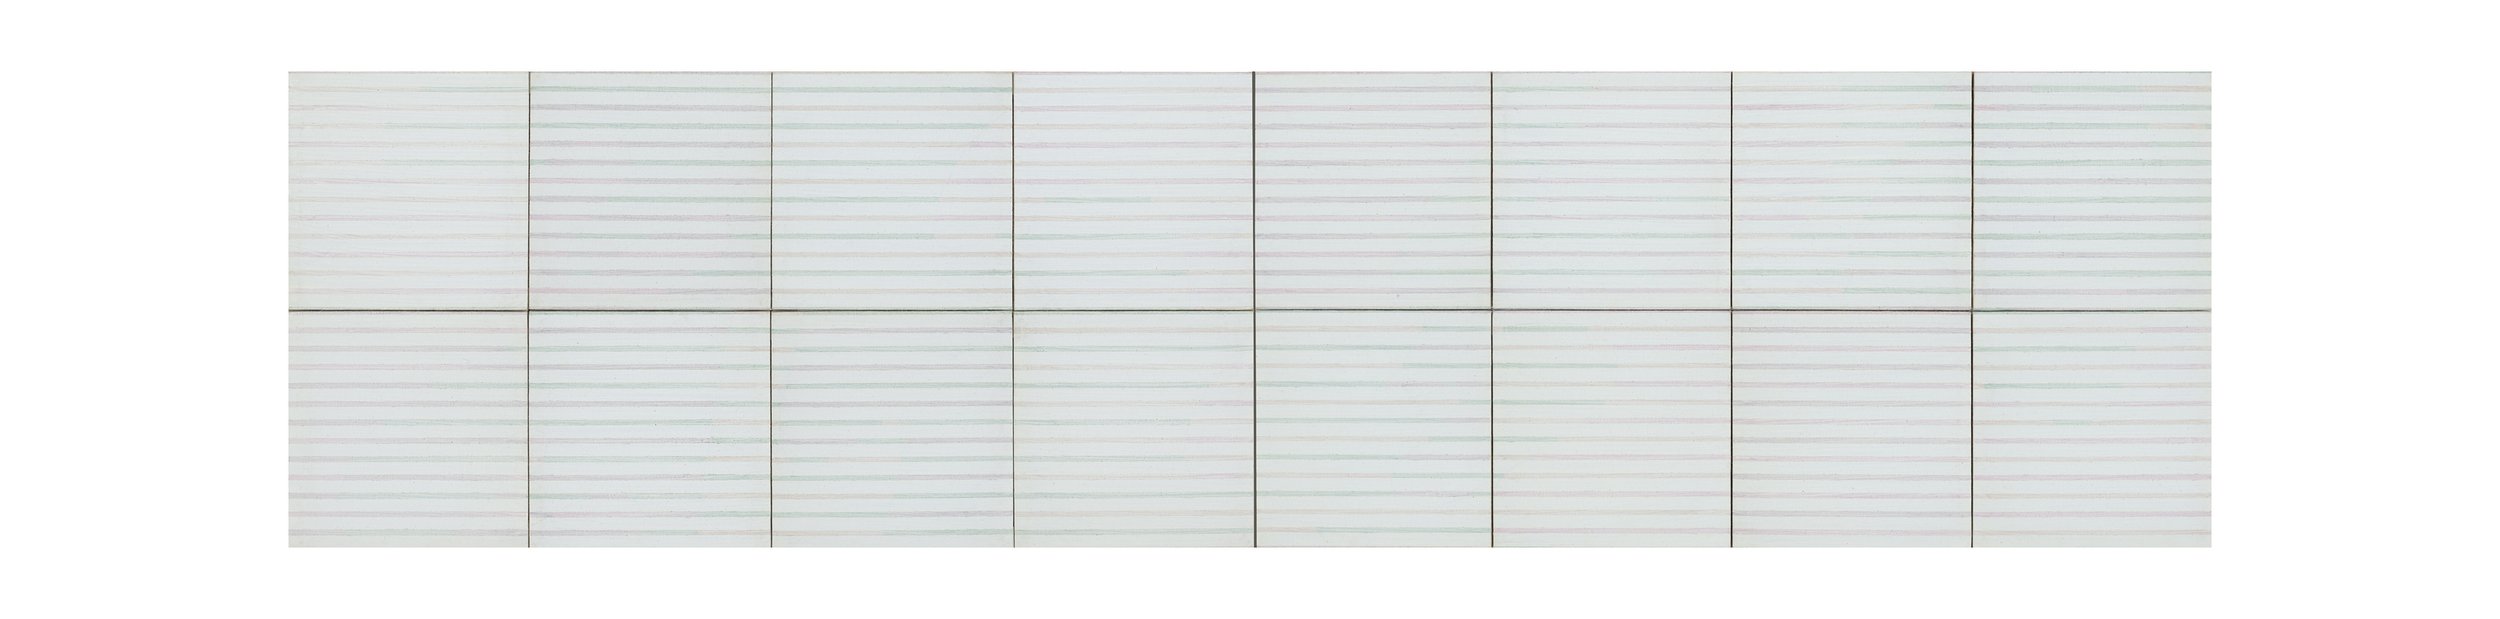   sentence structure, 1973   26 x 104, acrylic on canvas, 1973 